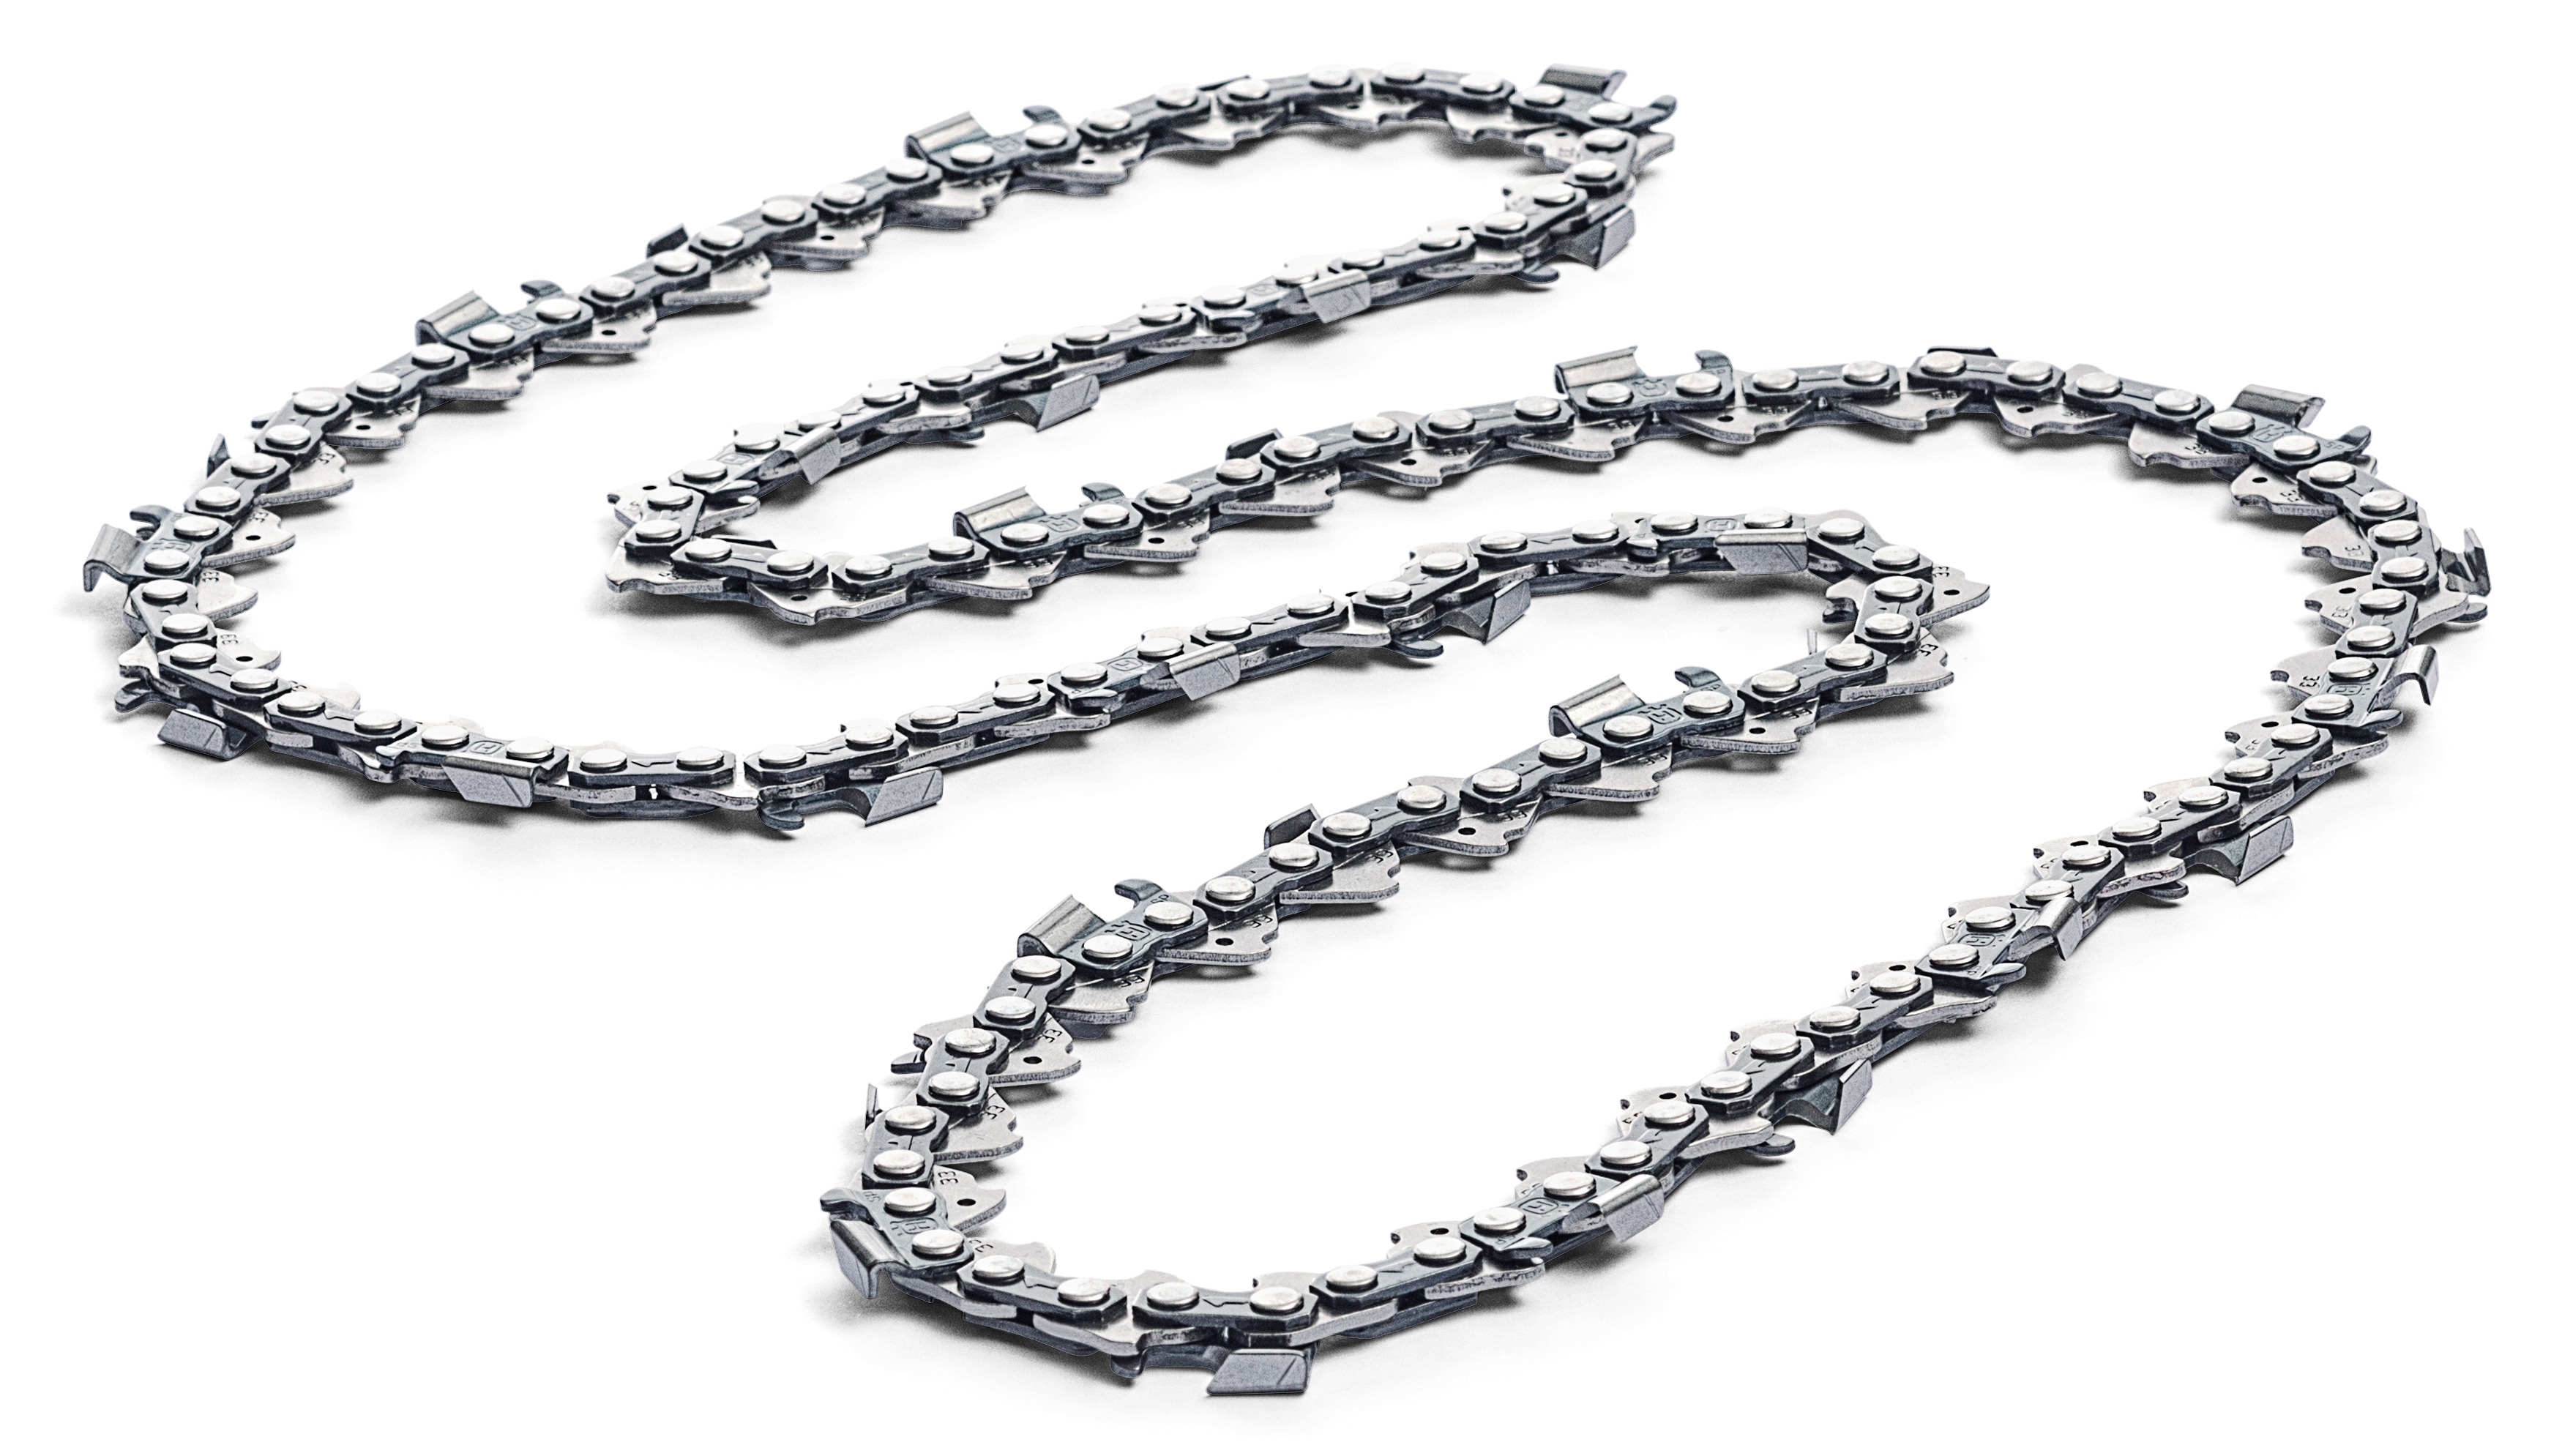 18" / 72DL X-CUT SP33G Semi-Chisel Chainsaw Chain .325 Pitch .050 Gauge Pixel - Click Image to Close